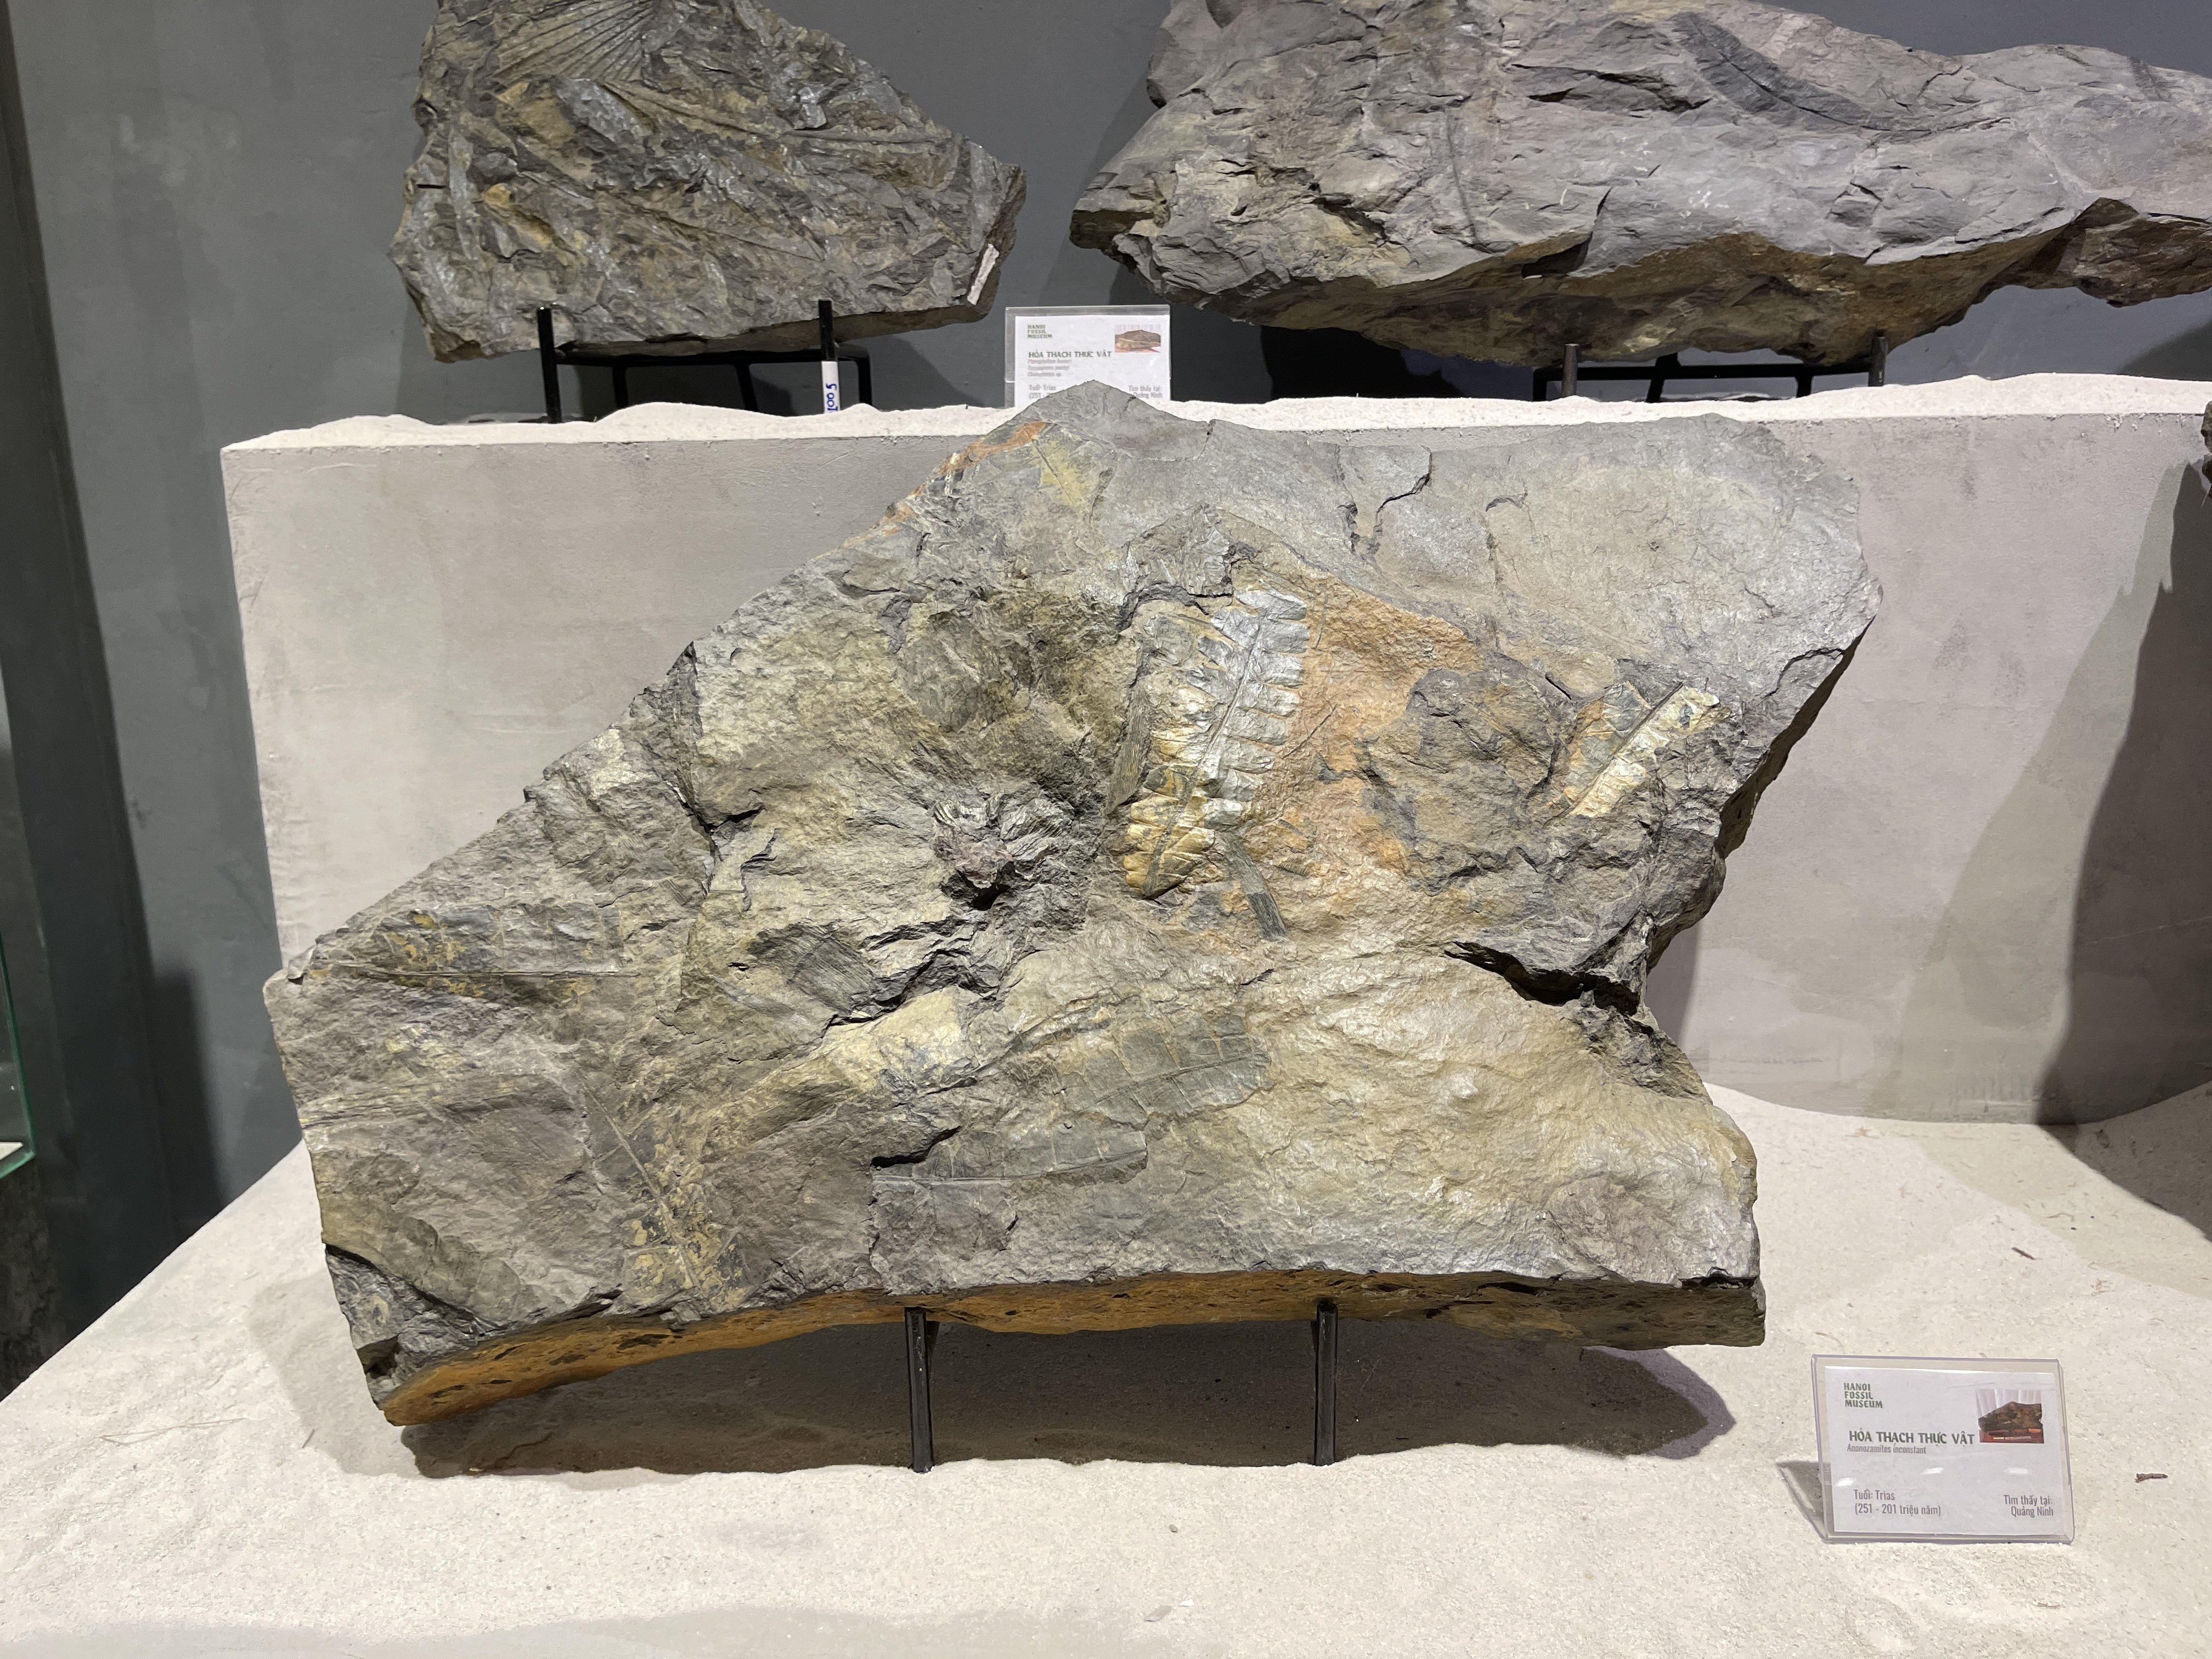 A plant fossil found in Quang Ninh Province, Vietnam on display at the exhibition. Photo: Dong Nguyen / Tuoi Tre News